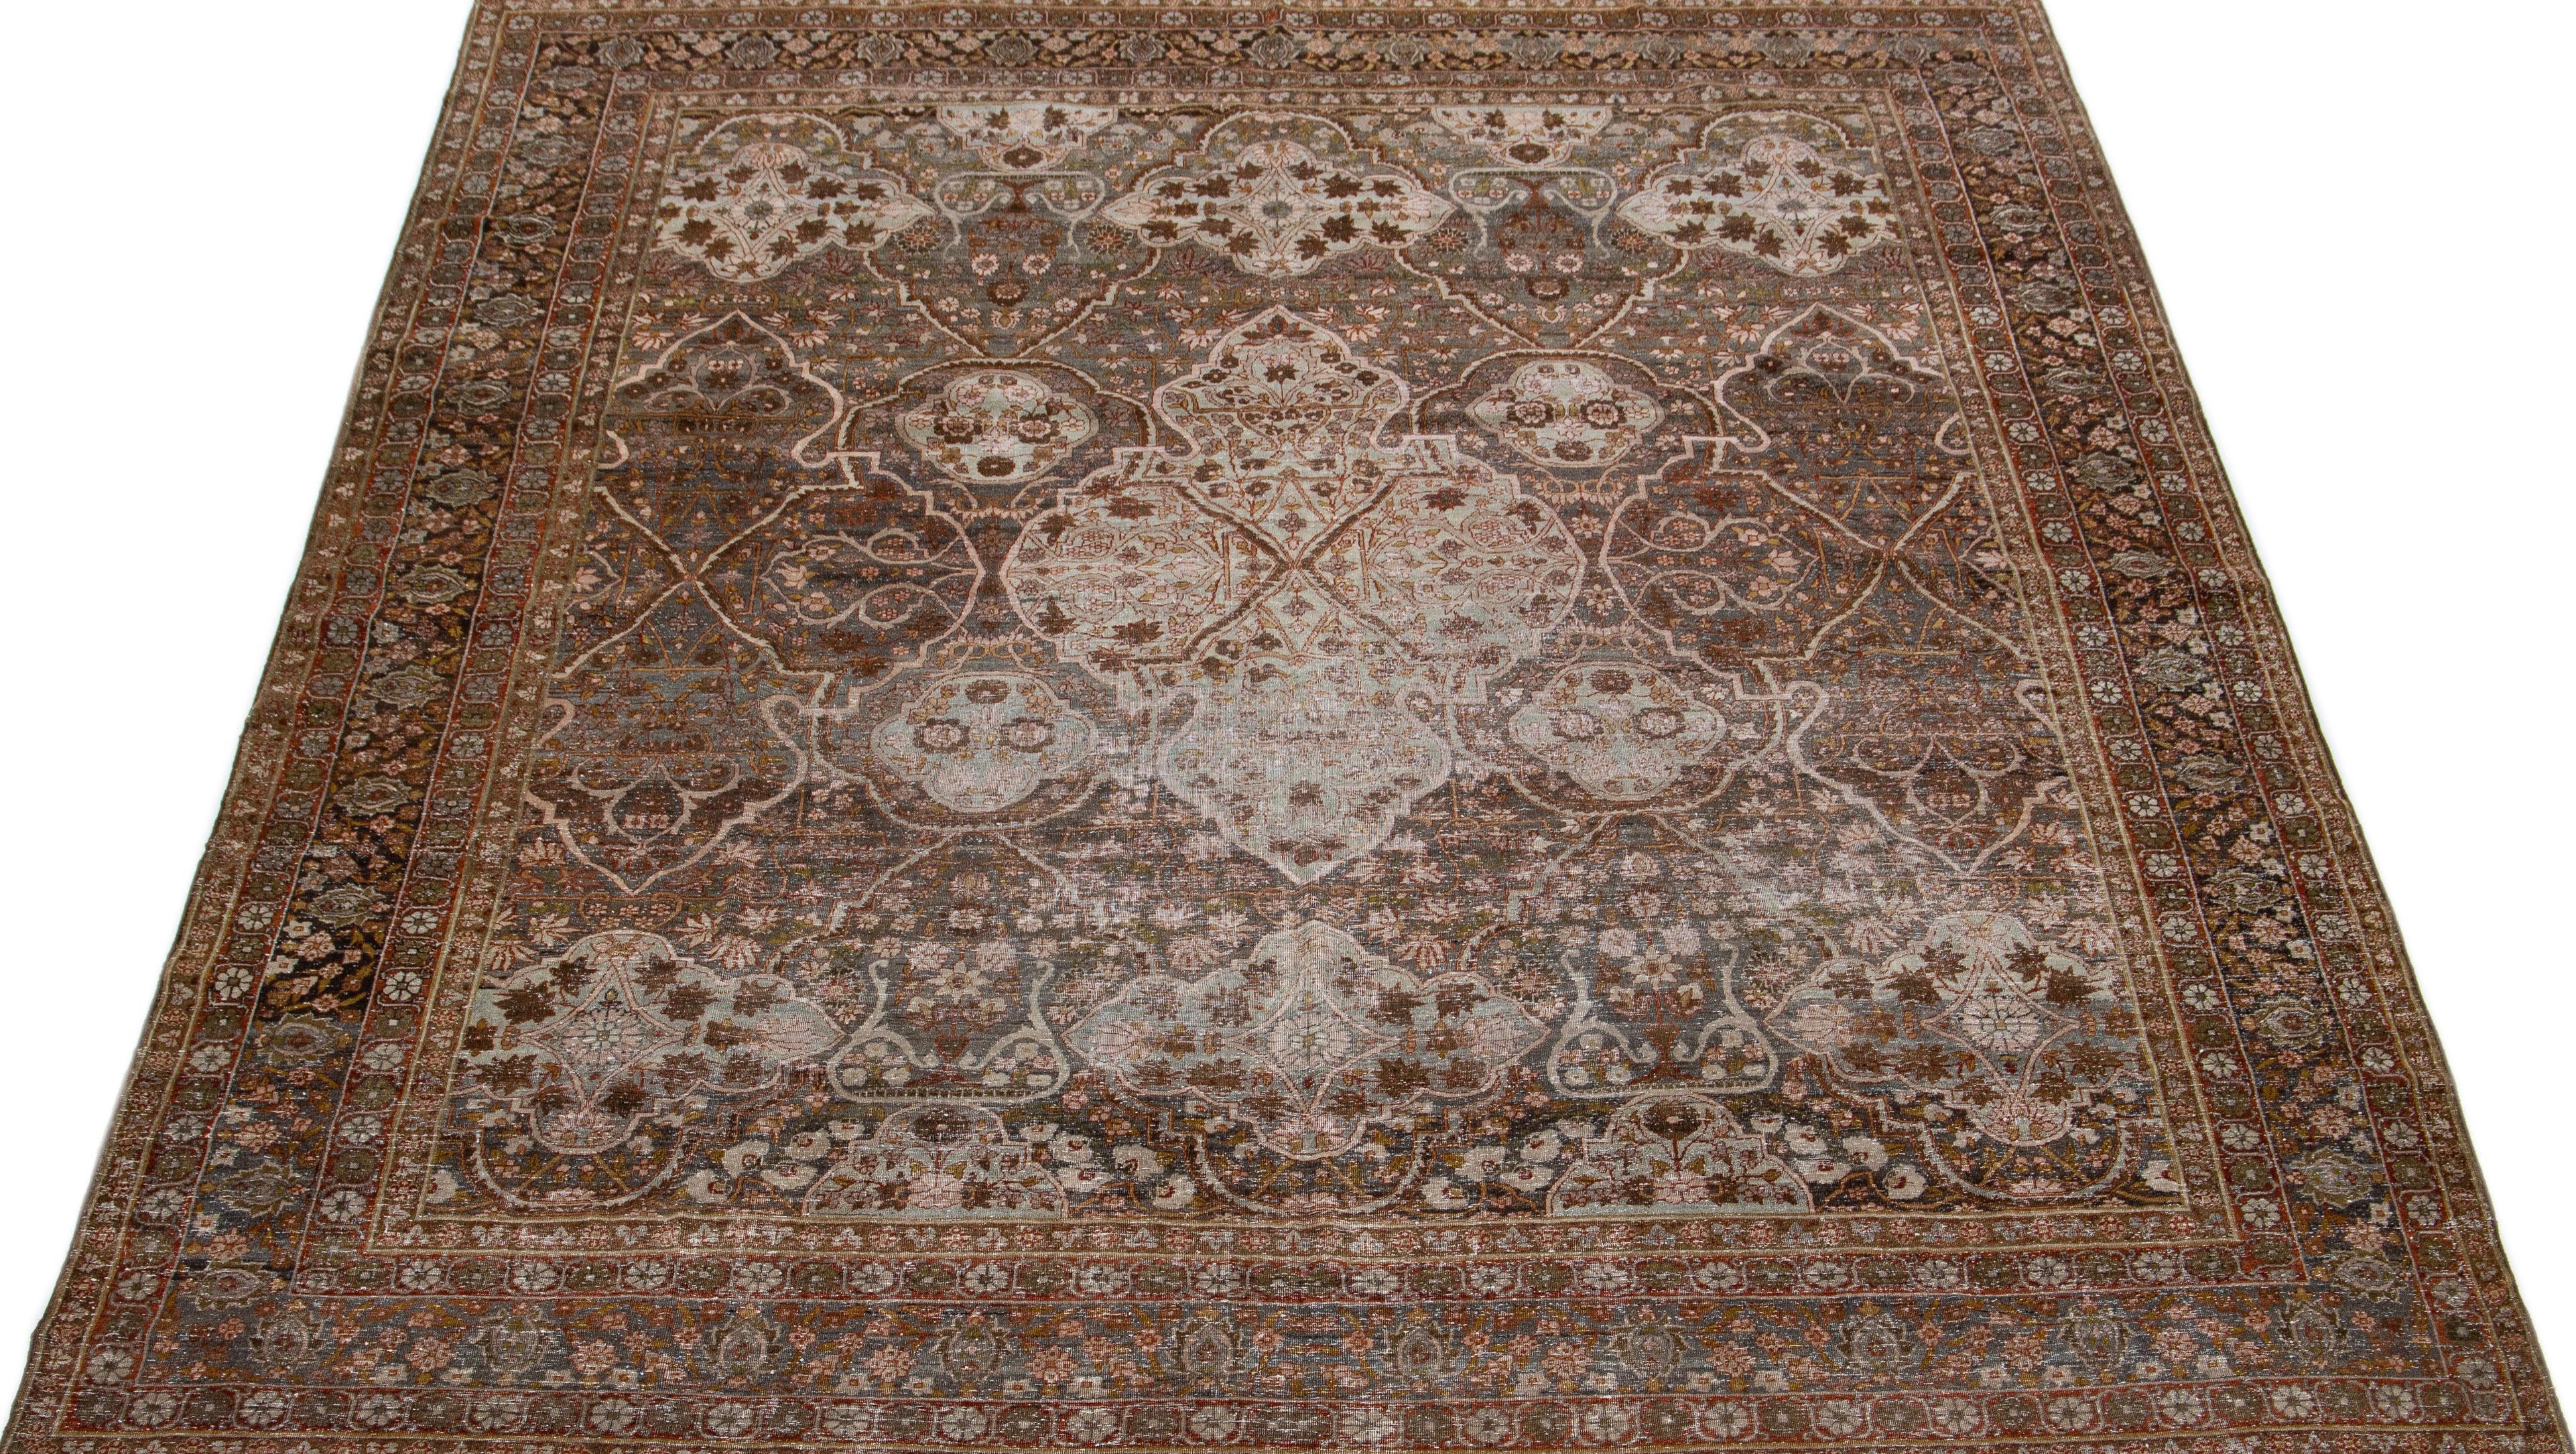 1900s Persian Tabriz Gray Wool Rug Handmade with Medallion Motif For Sale 1